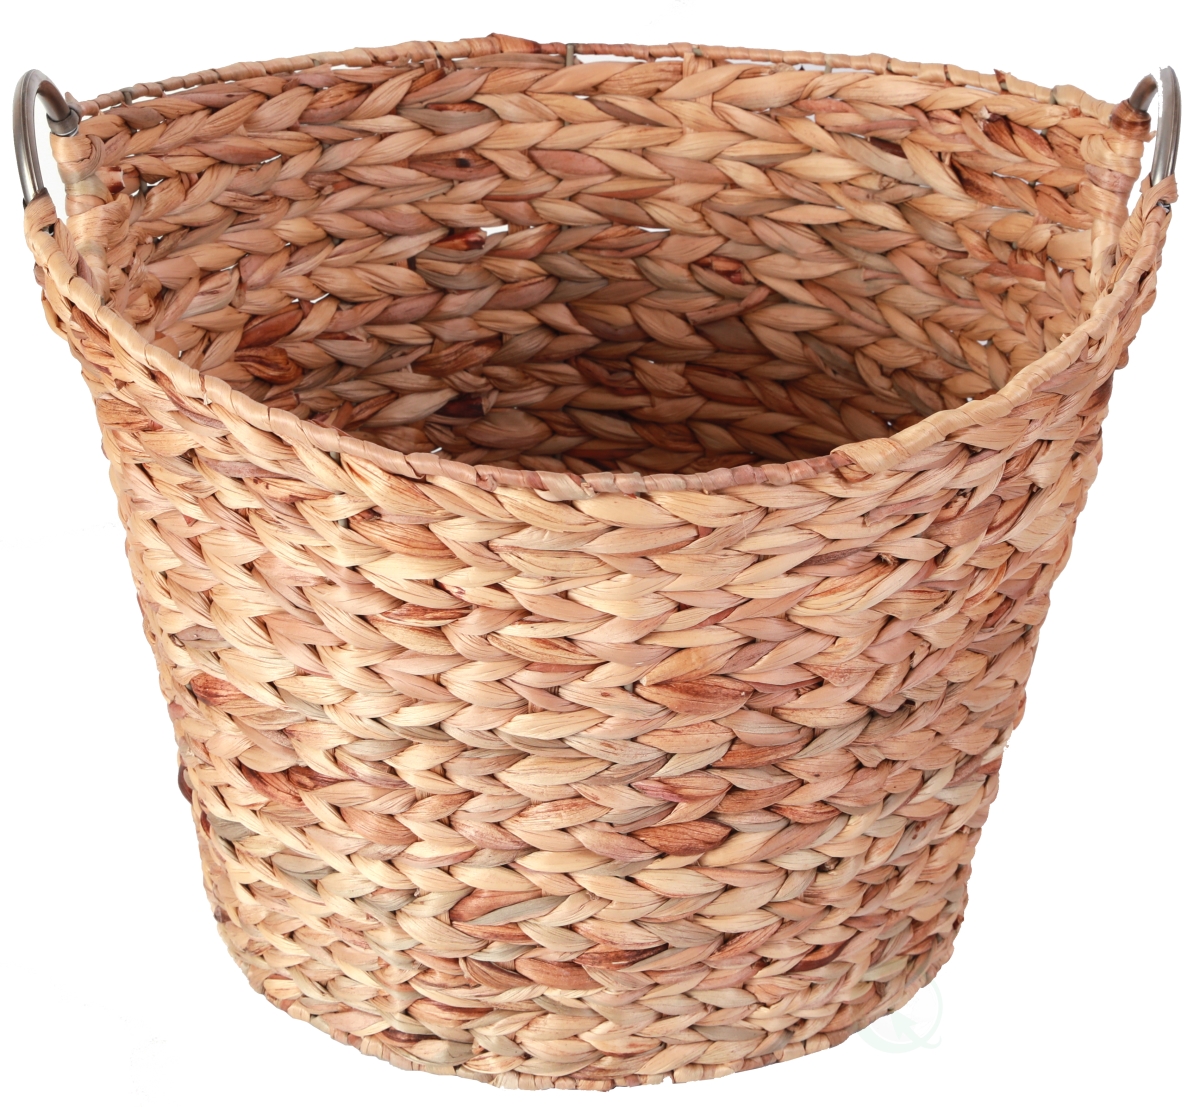 Picture of Vintiquewise QI003364.L 14 x 17 x 16 in. Large Round Water Hyacinth Wicker Laundry Basket, Brown